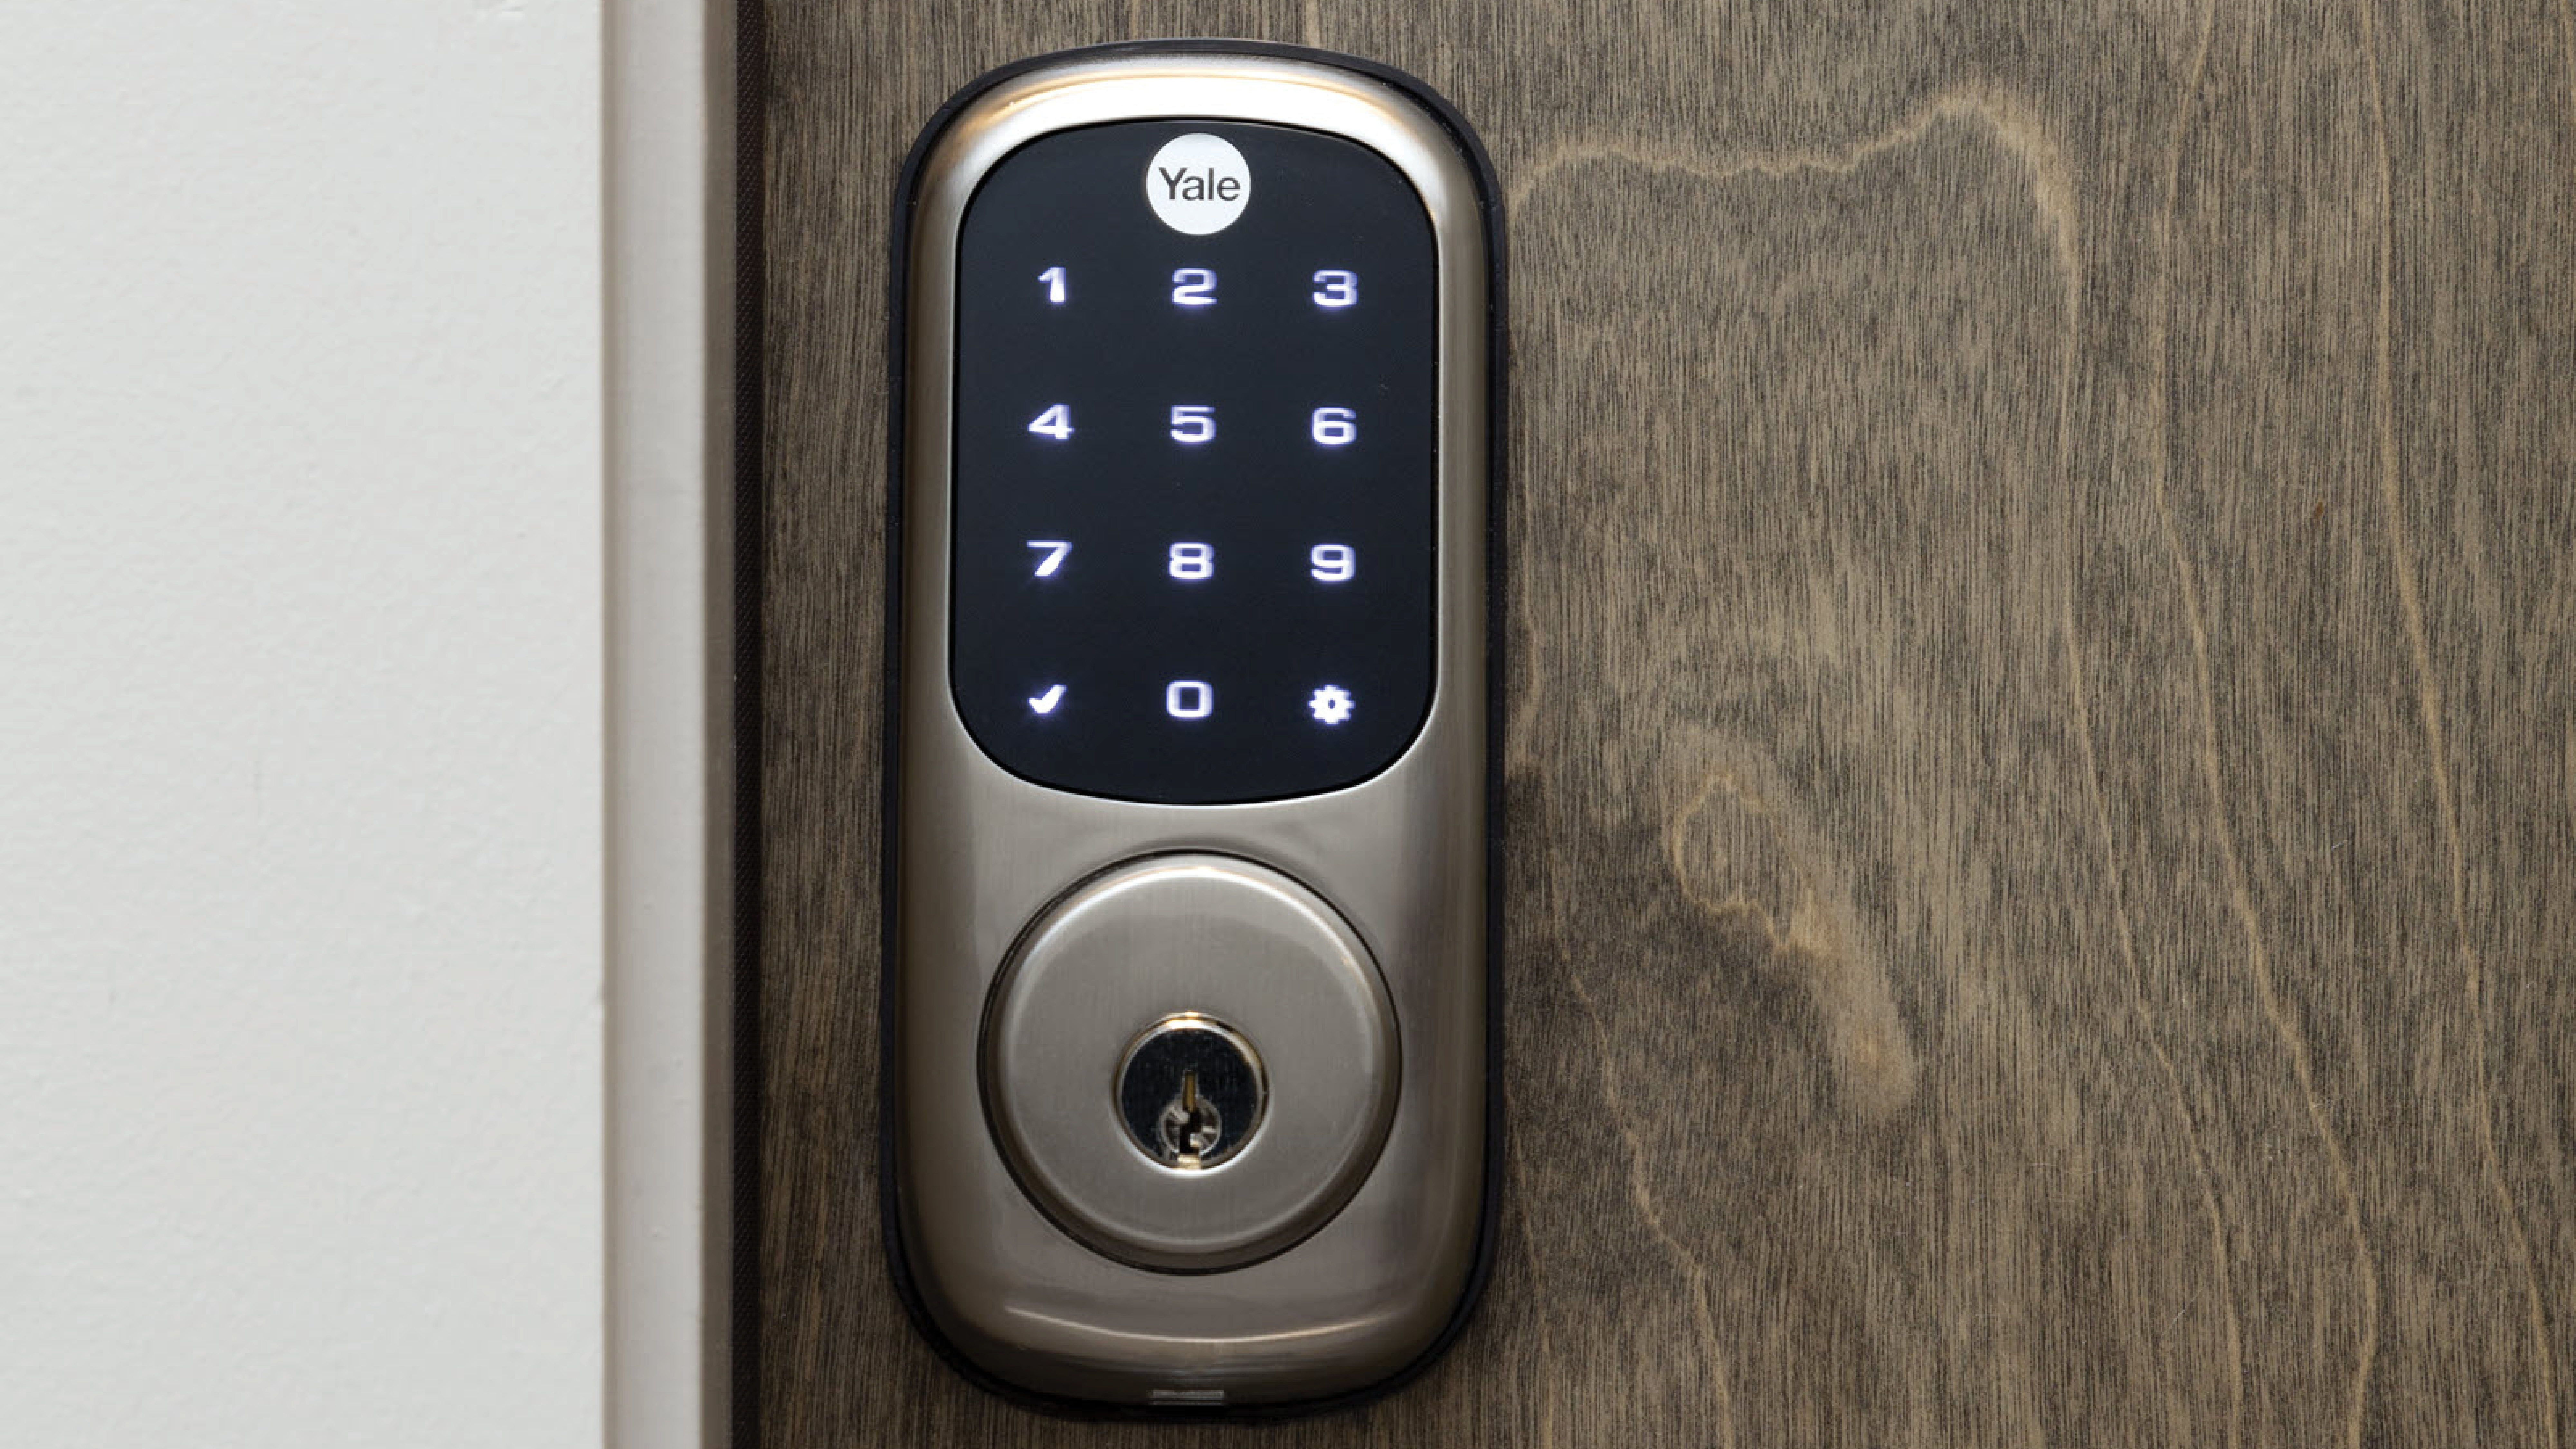 Smart door locks - residents can move throughout the community and into their home using only their smartphone.